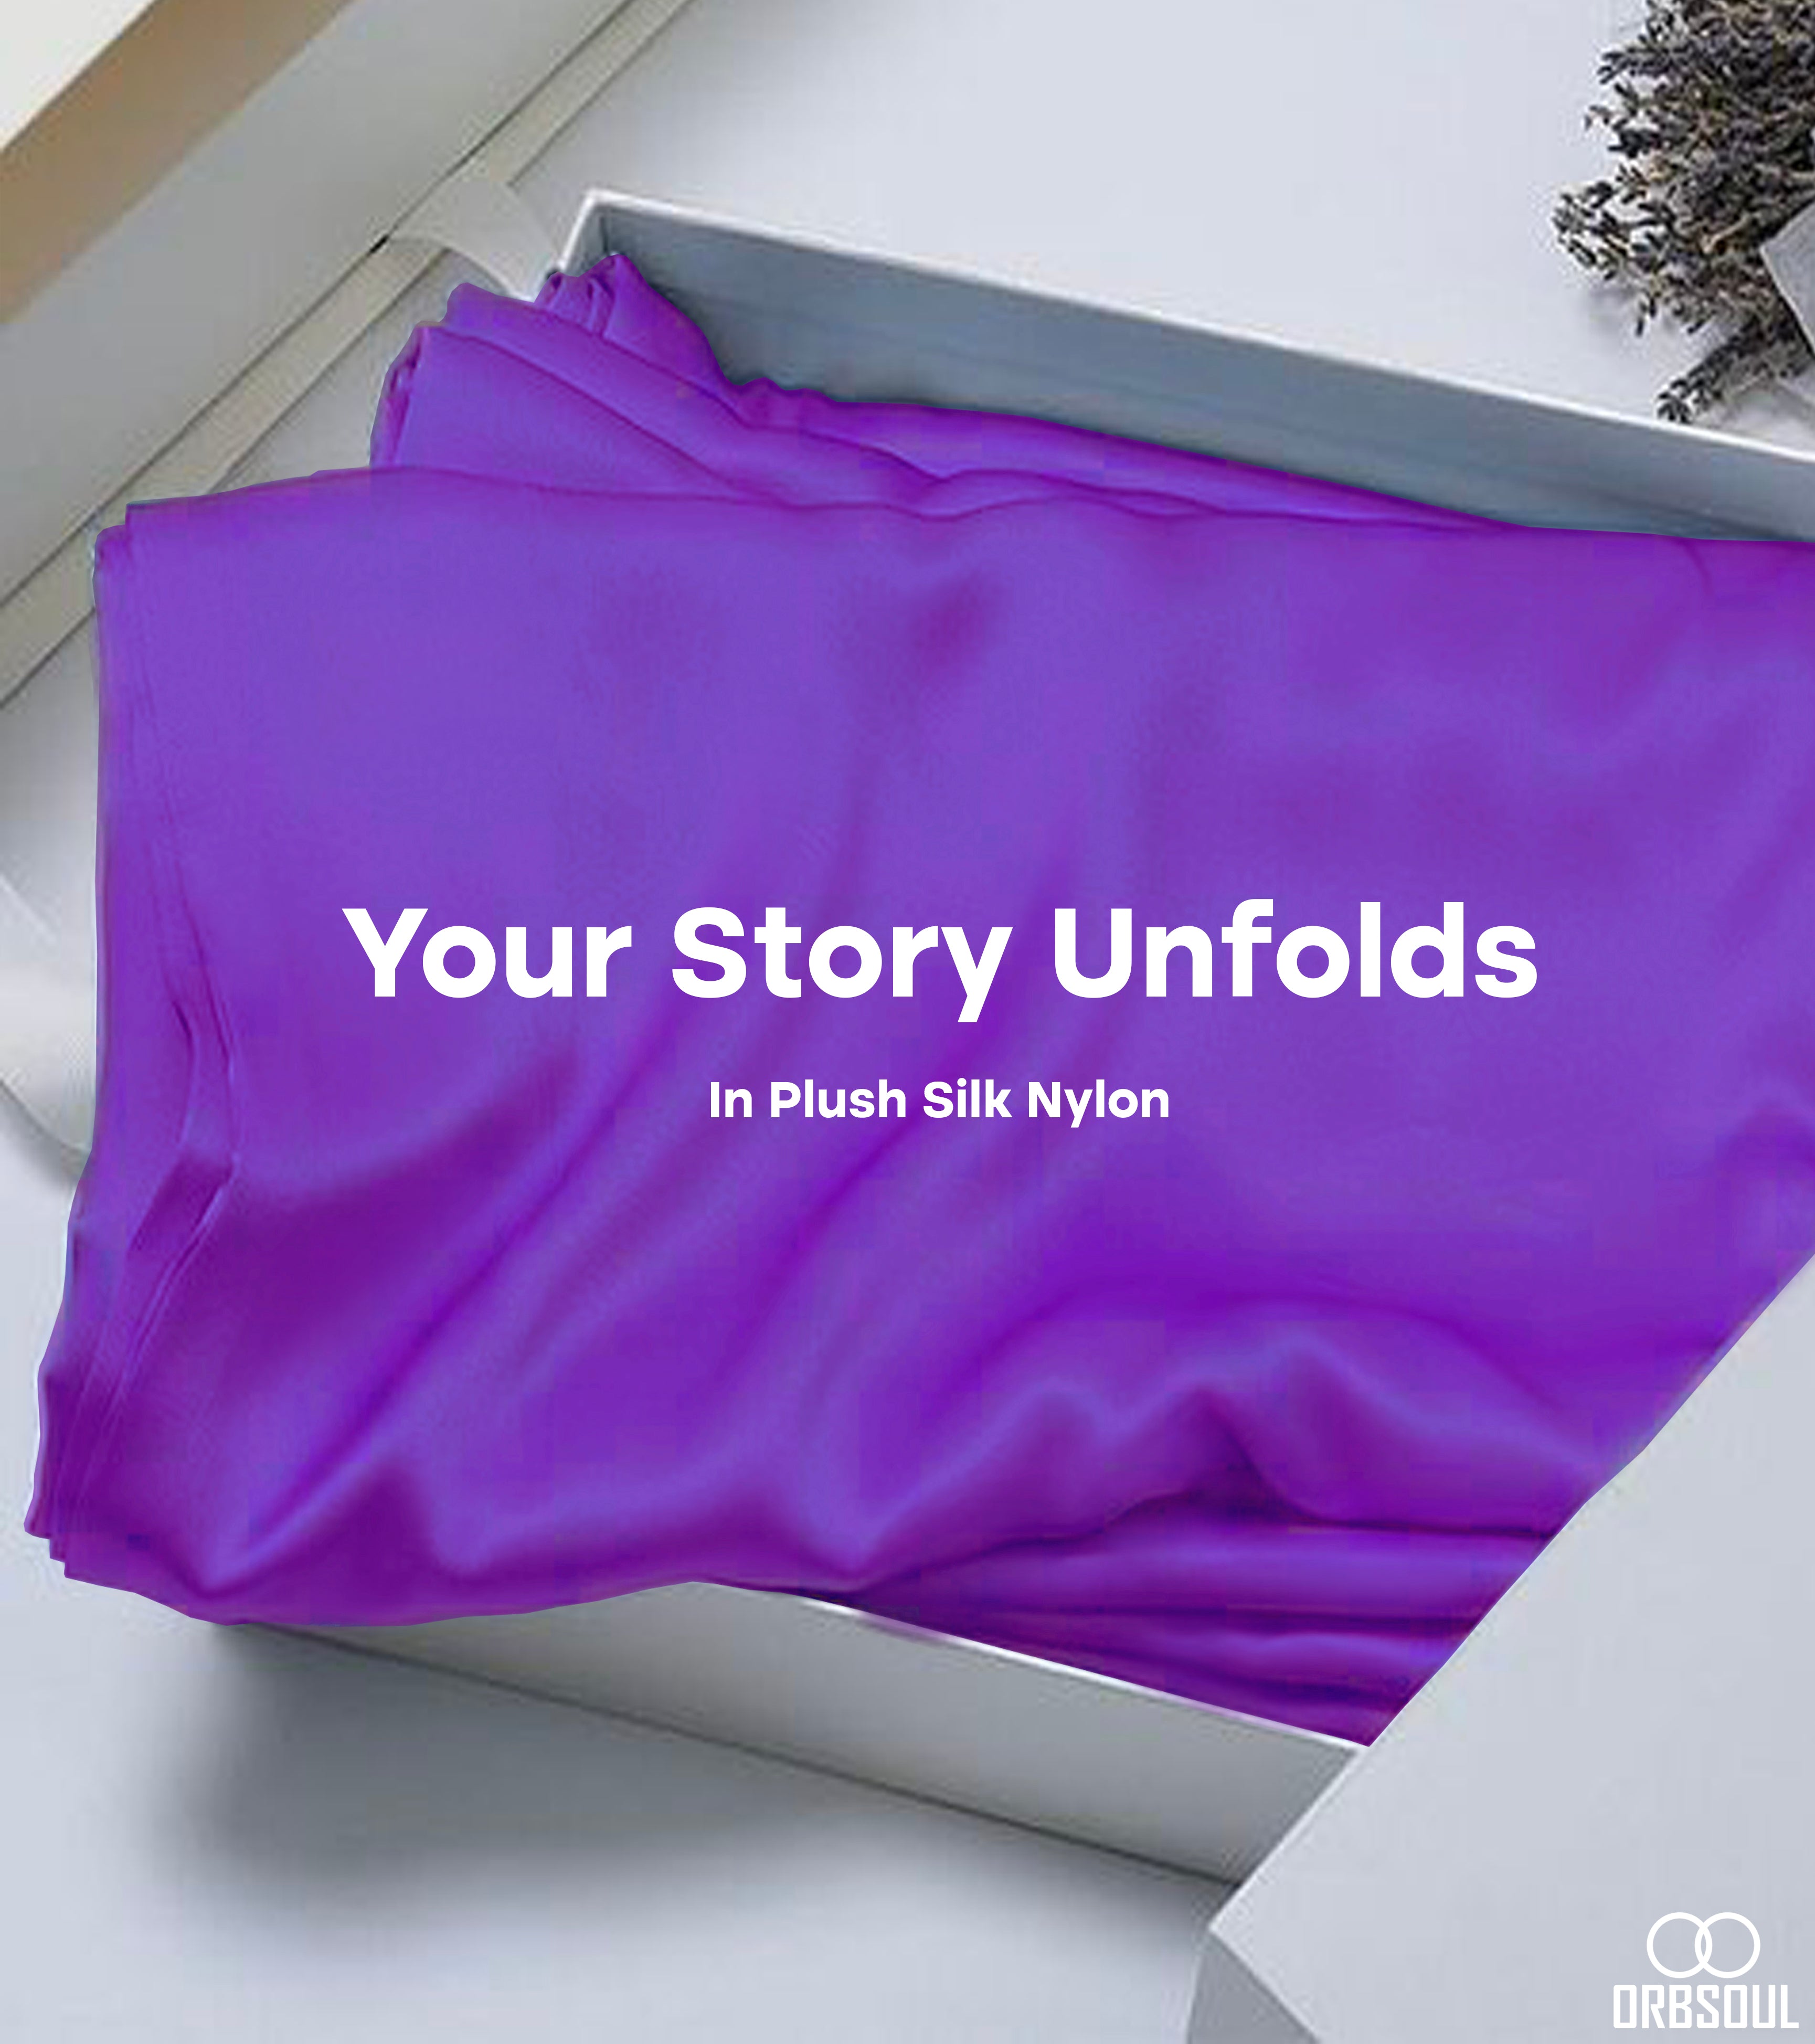 aerial silks fabric in a box being unpacked with text that says your story unfolds